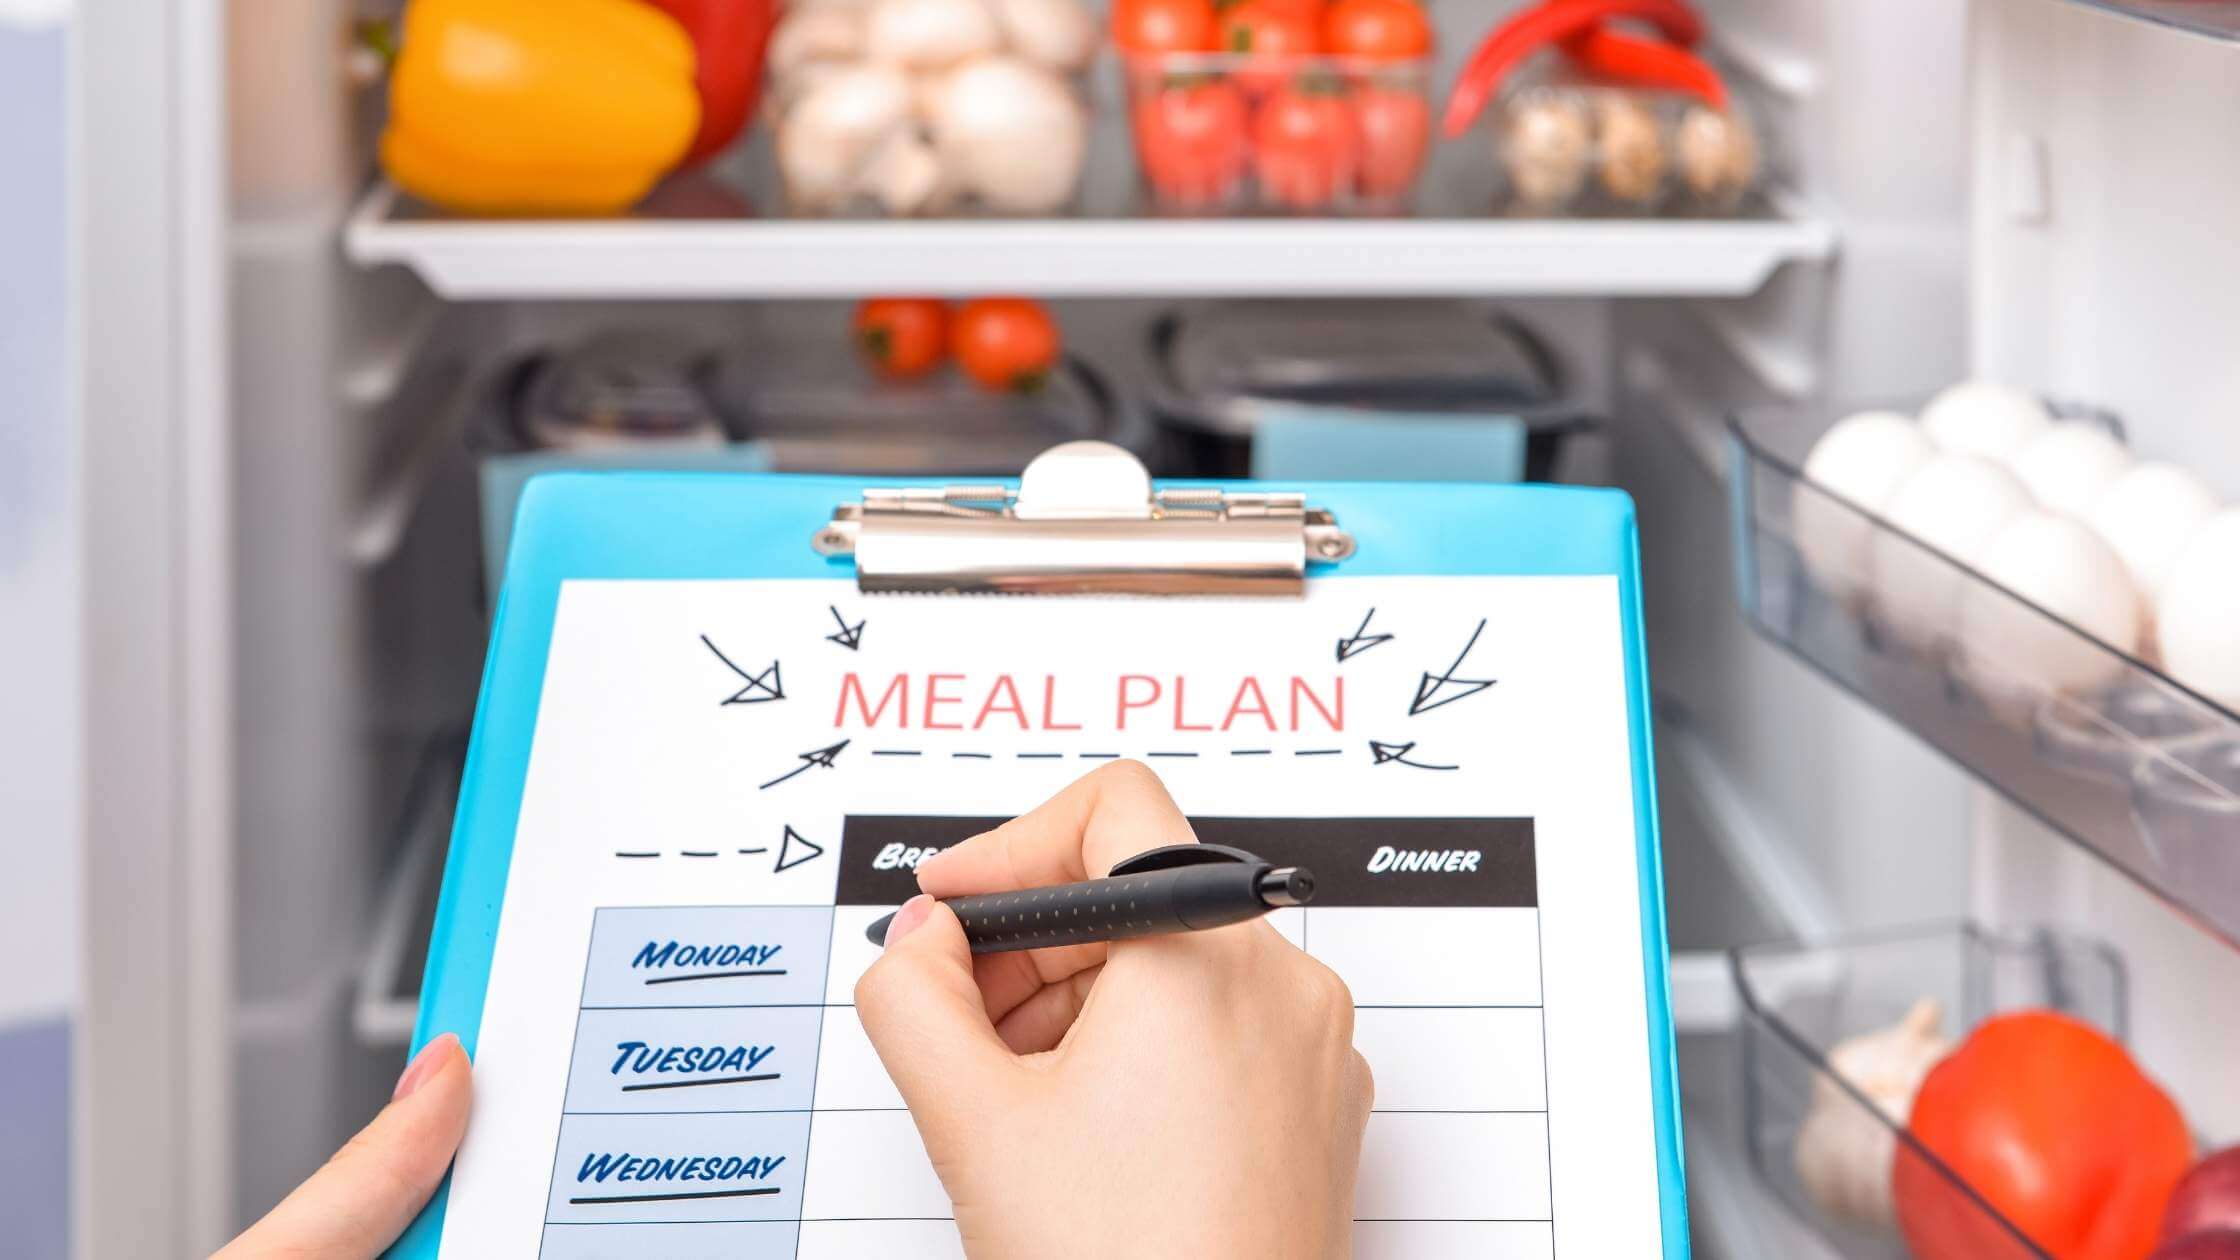 clipboard with meal plan in front of open refridgerator